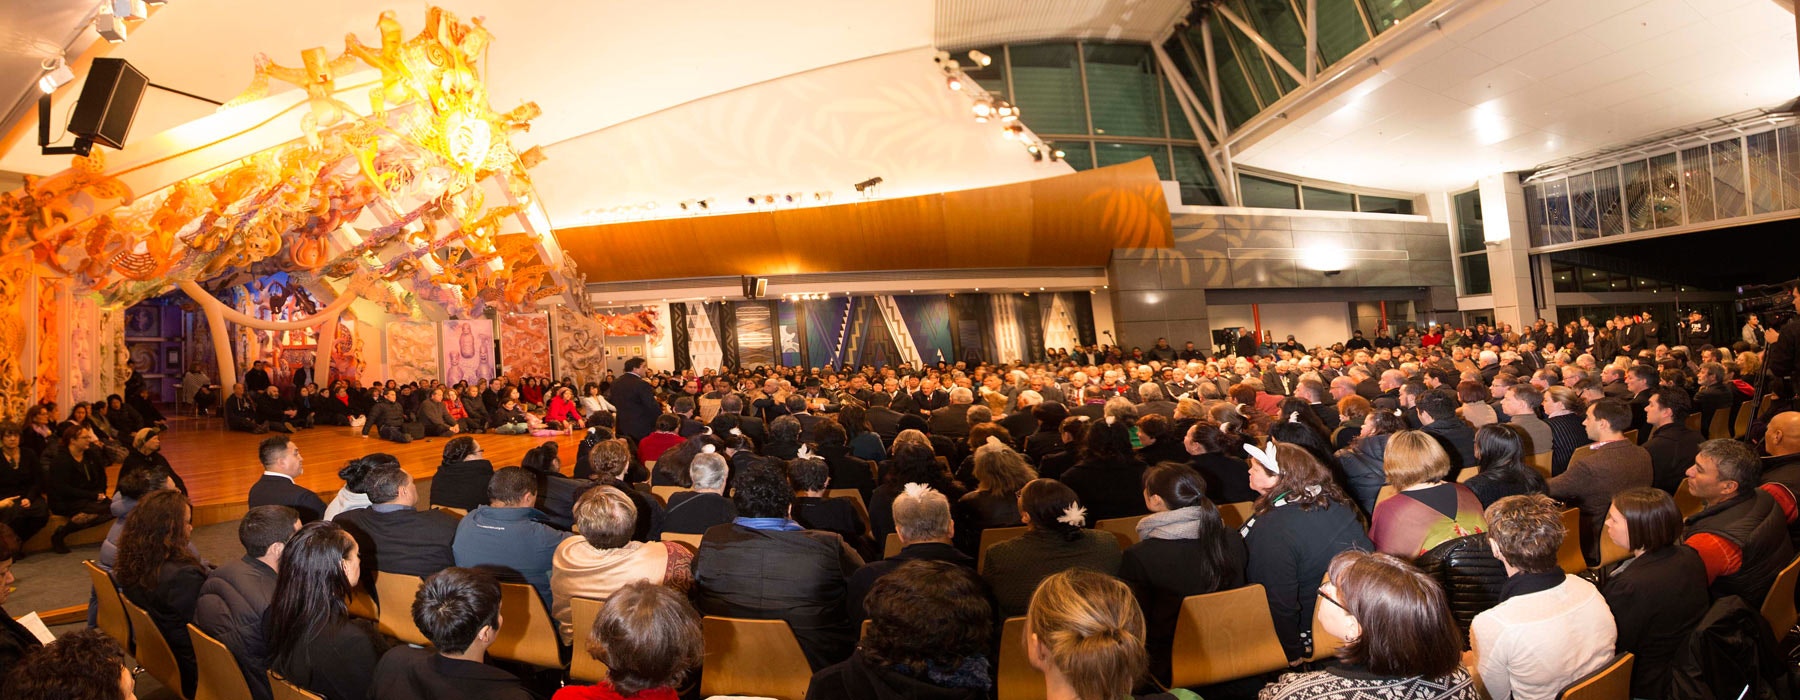 Ngāti Toa opening ceremony, 2014. Photograph by Norm Heke. Te Papa